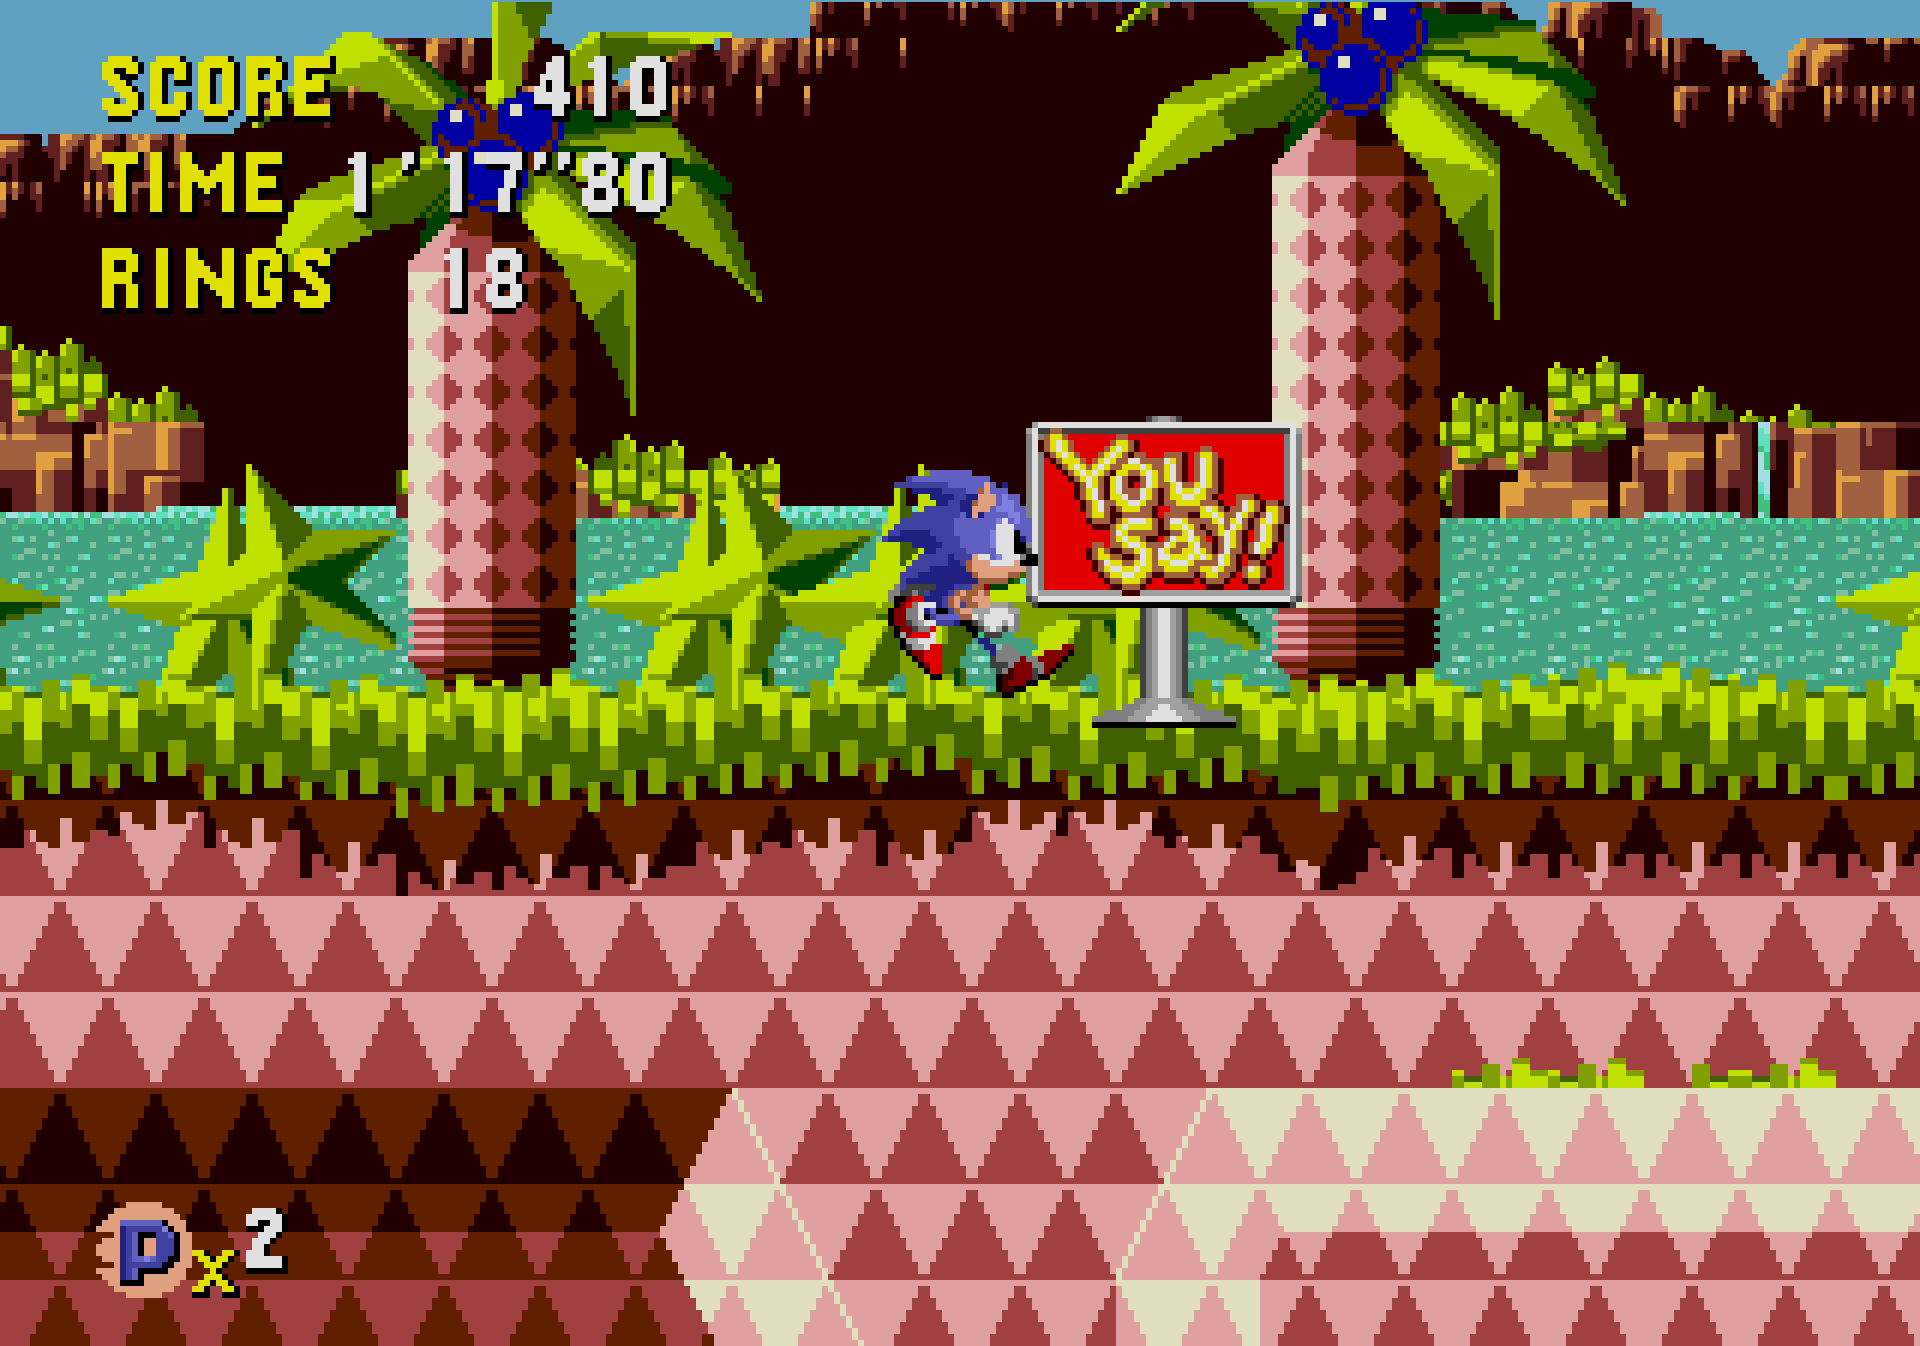 Sonic 3 Prototype With Lost Content Discovered - SEGA Online Emulator